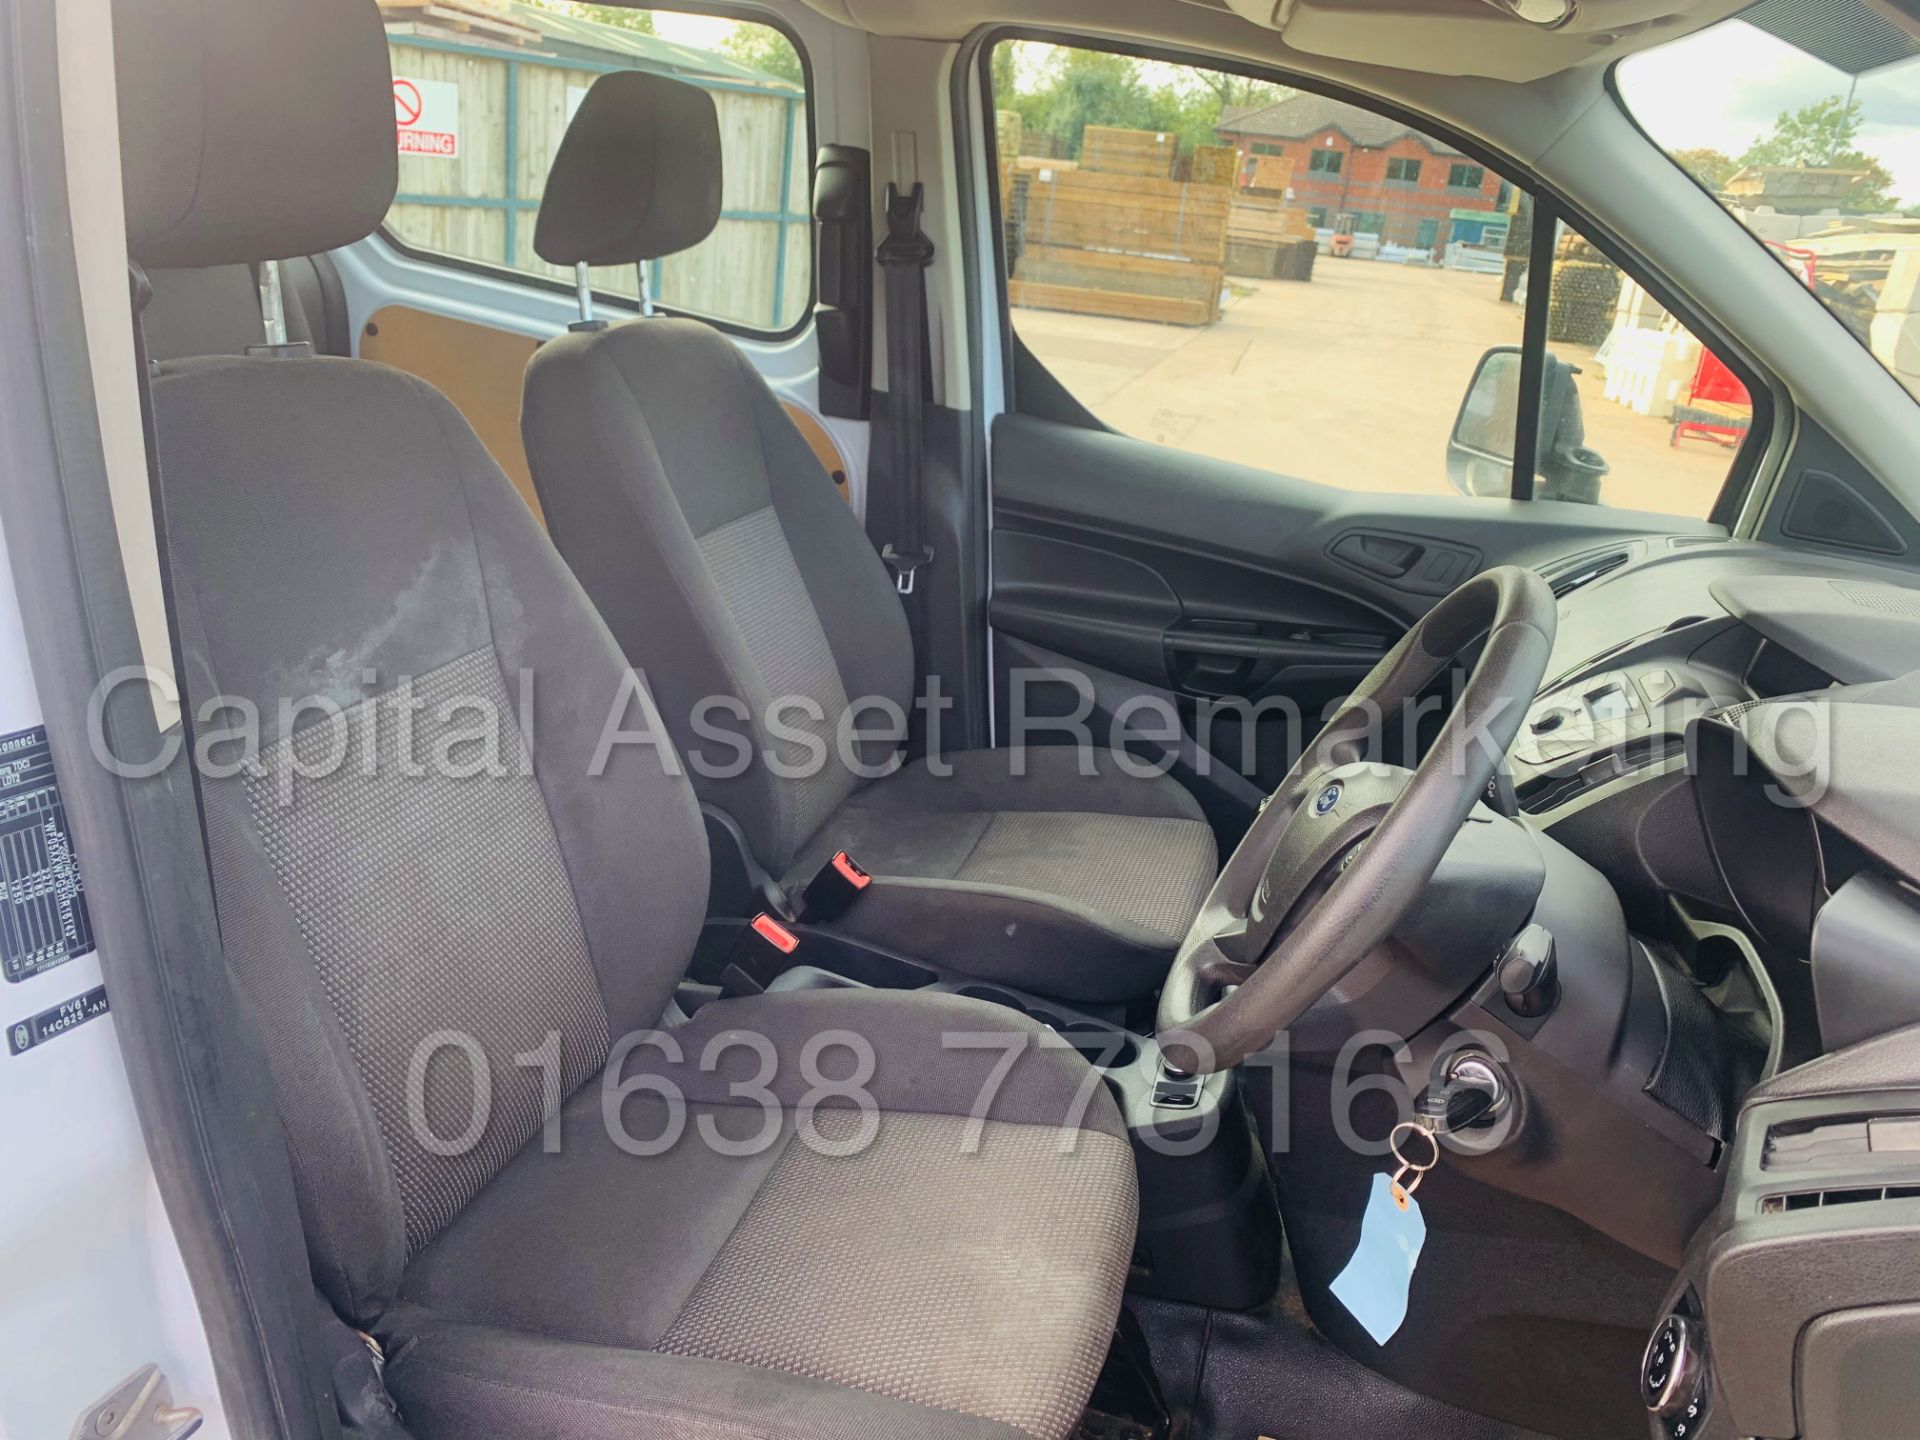 (ON SALE) FORD TRANSIT CONNECT *LWB - 5 SEATER CREW VAN* (2018 - EURO 6) 1.5 TDCI *A/C* (1 OWNER) - Image 28 of 40